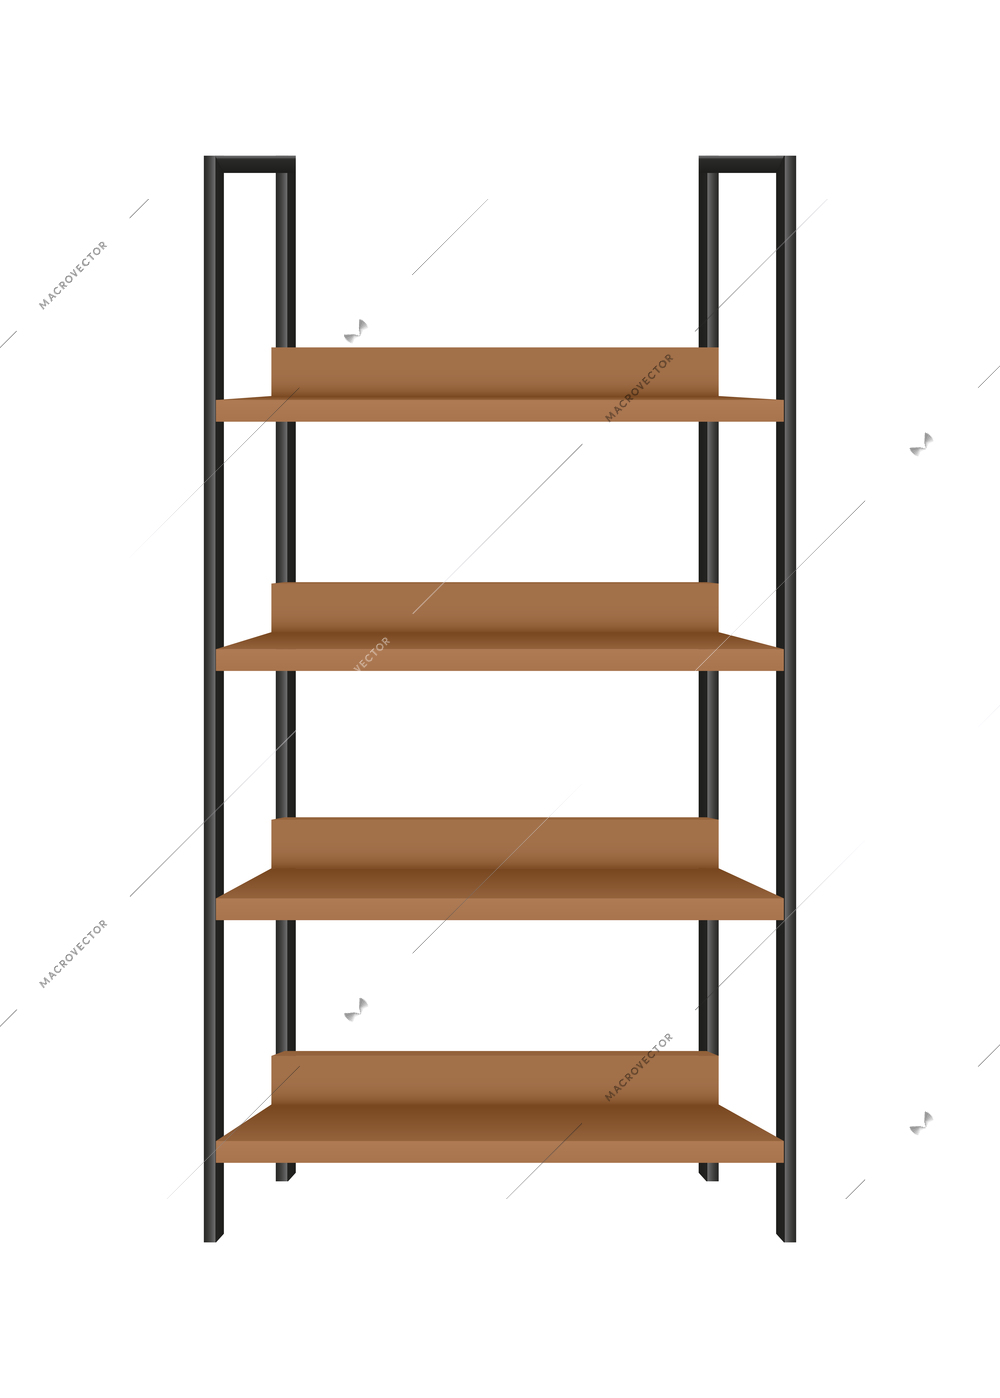 Realistic empty metal rack with wooden shelves vector illustration